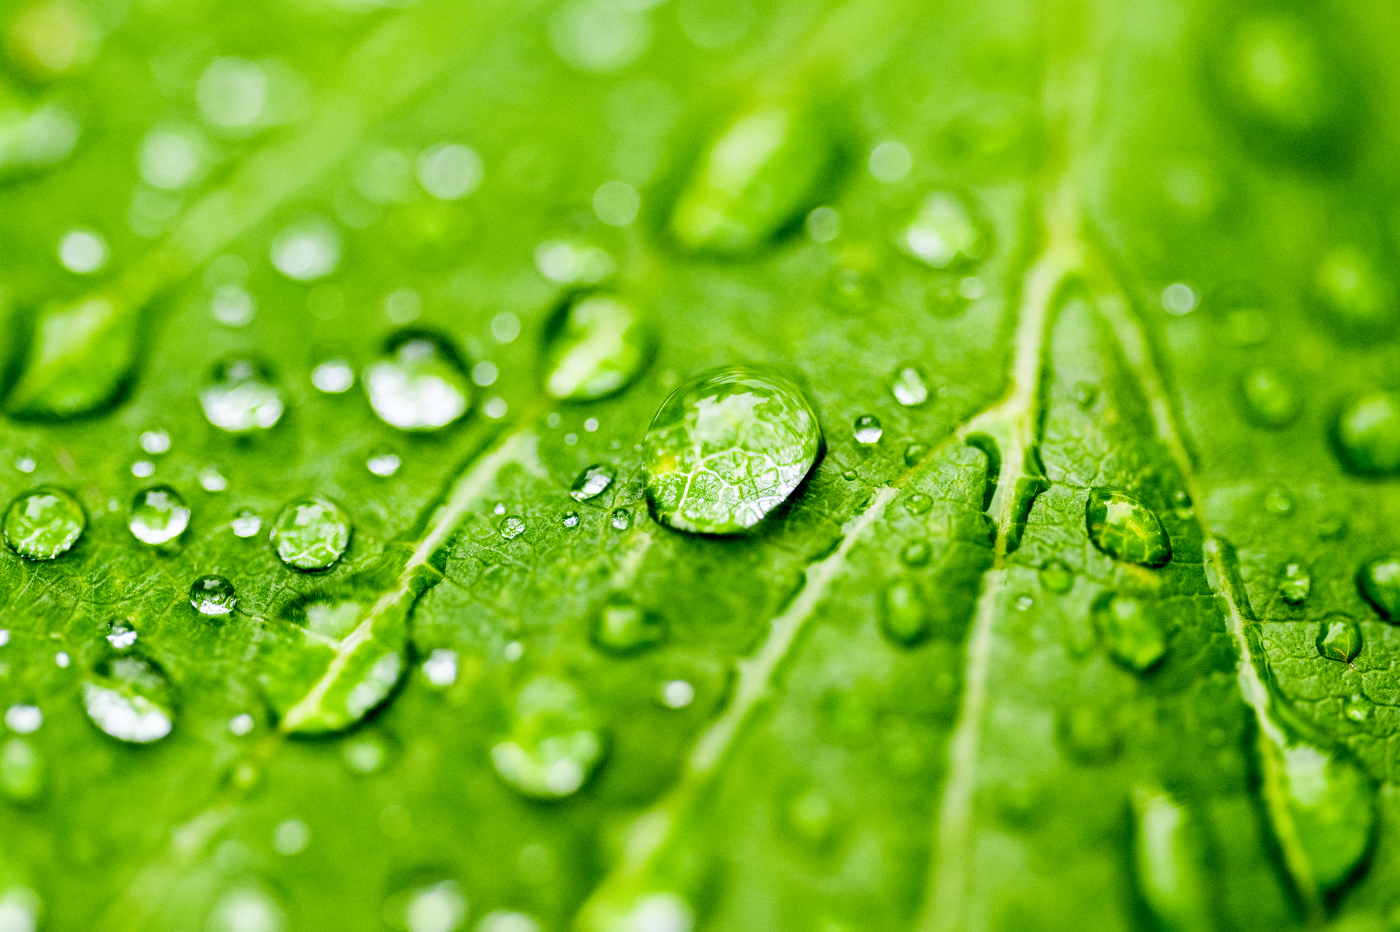 A close-up of water droplets on a leaf.